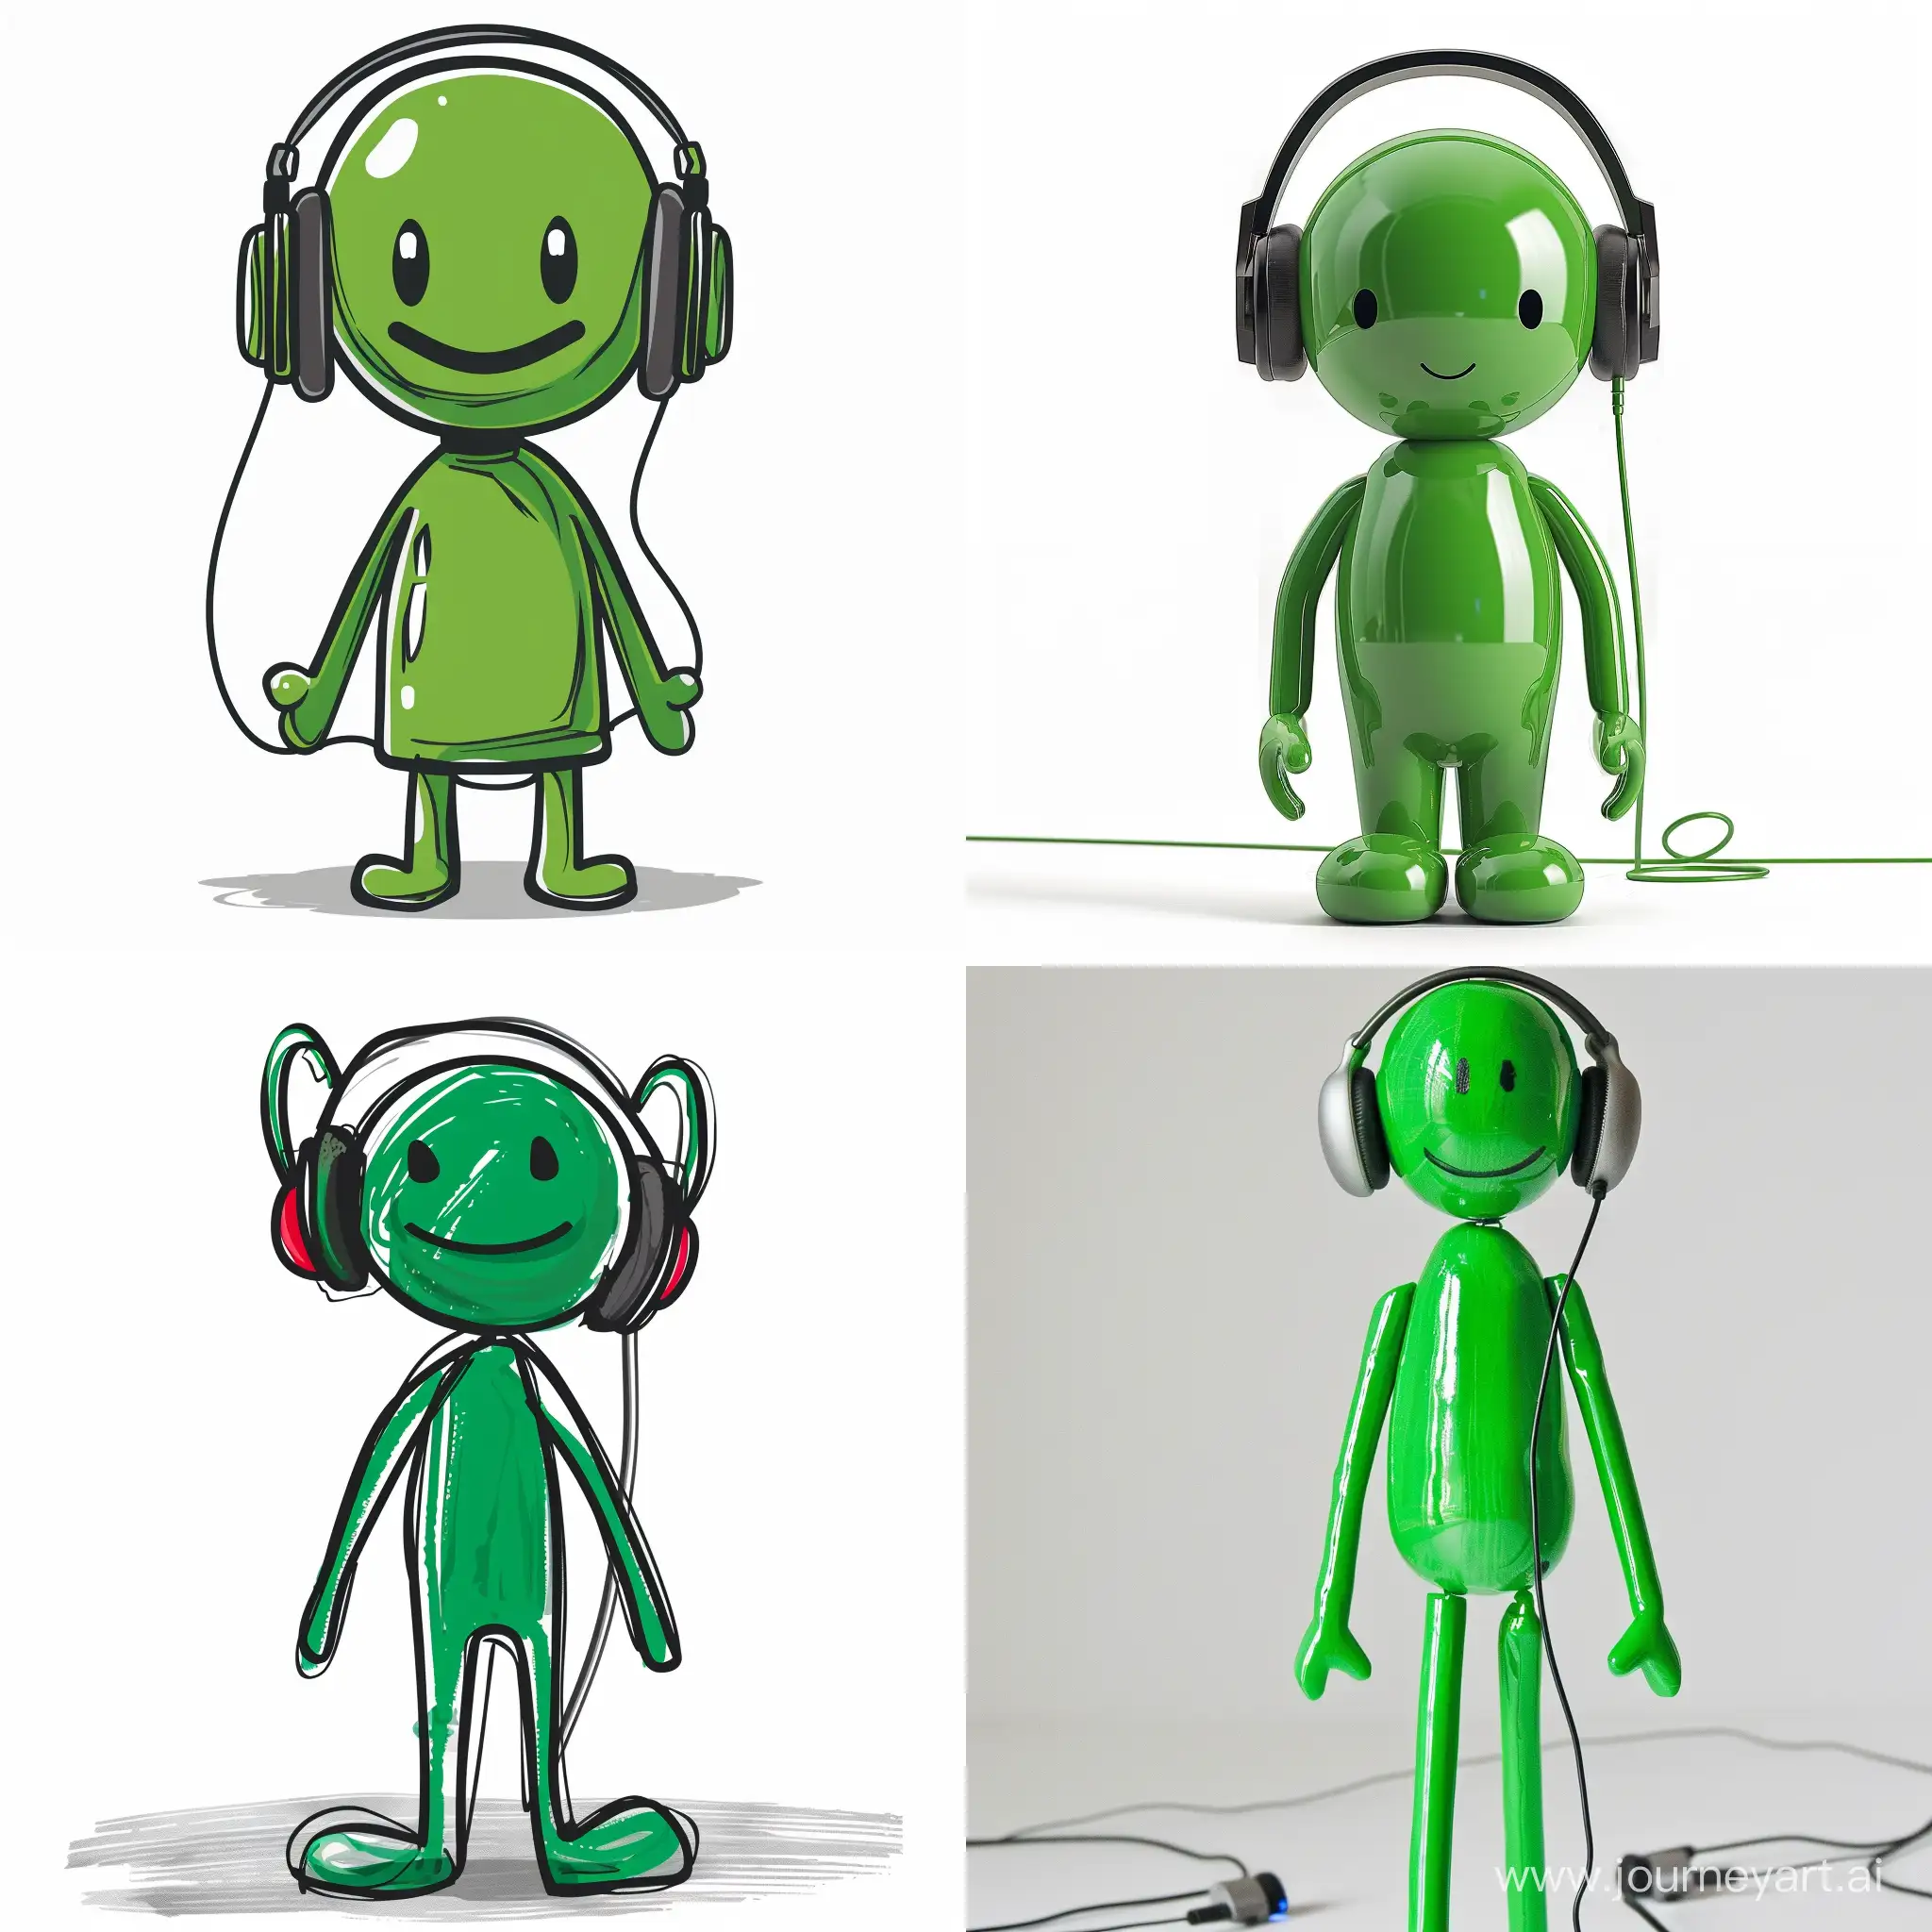 Animated-Stick-Figure-Character-with-Headphones-in-Vibrant-Green-Tones